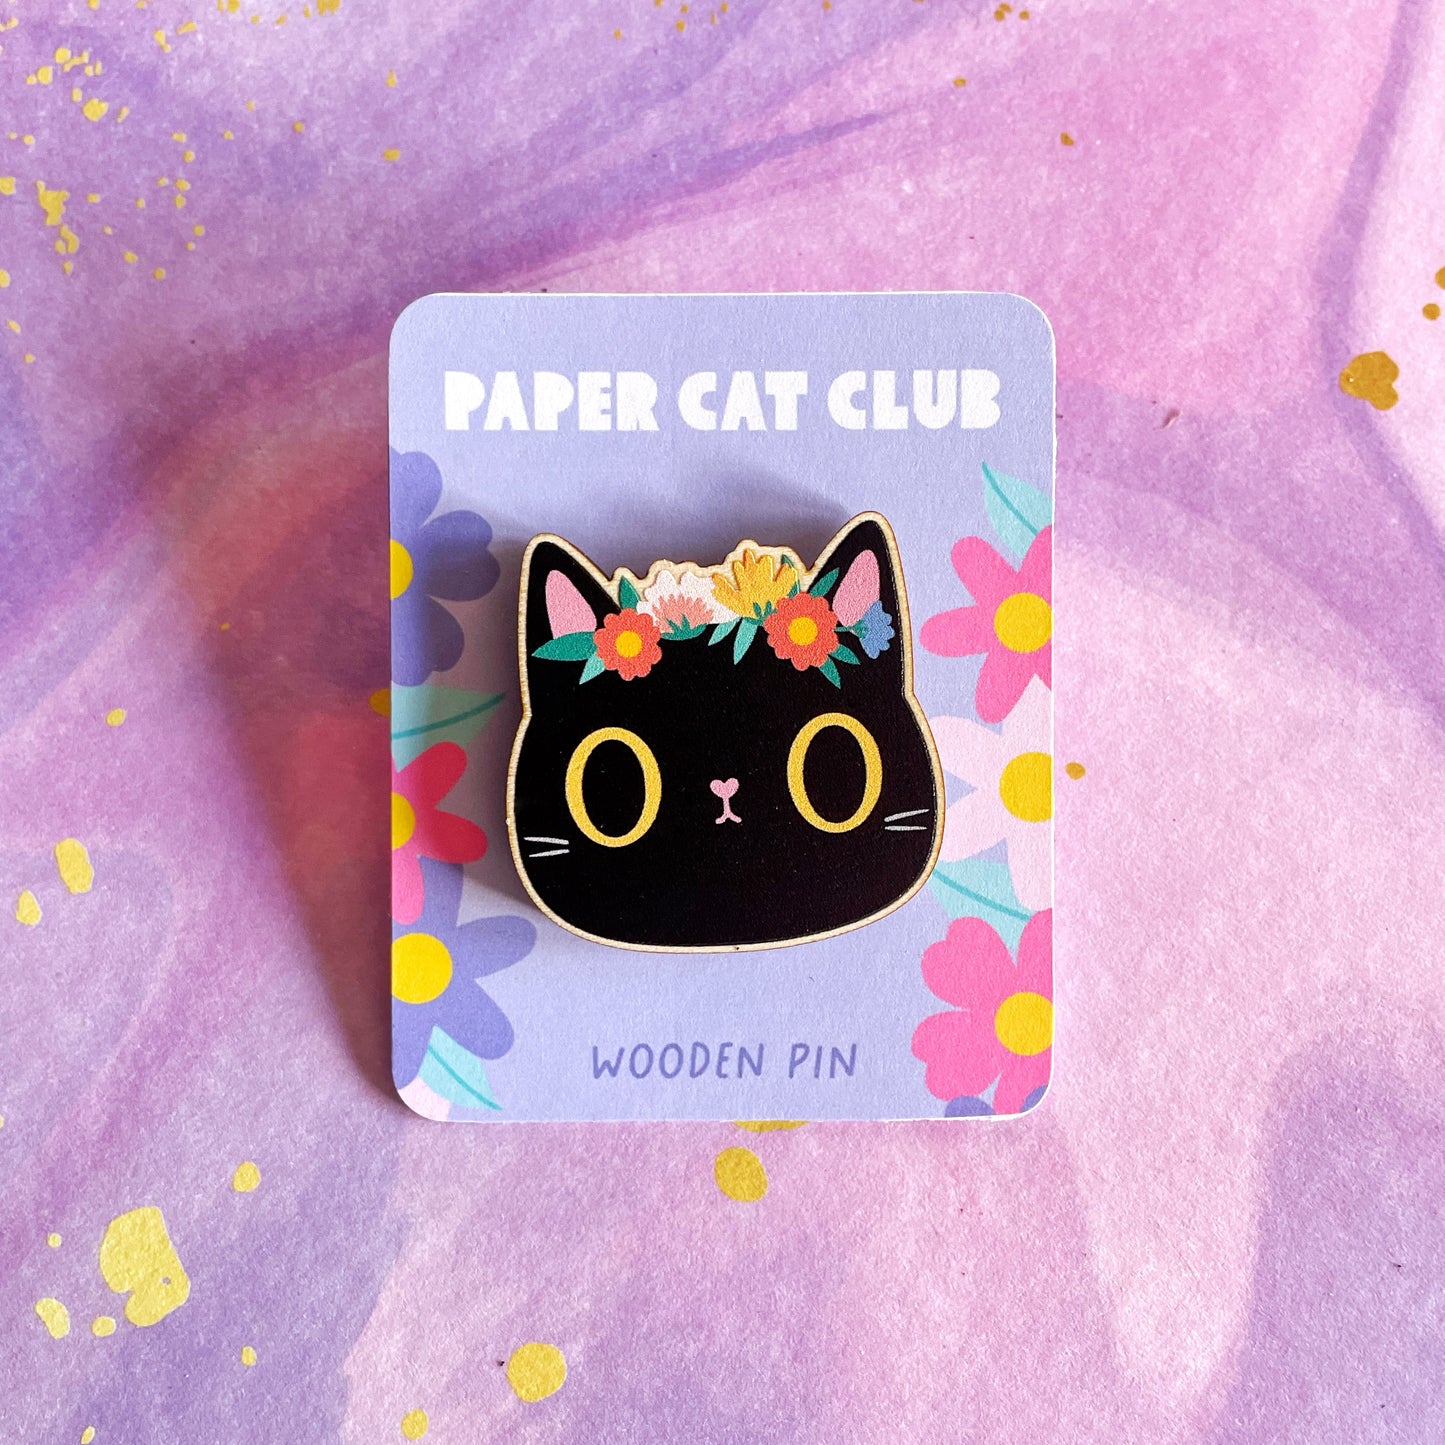 Black Cat wooden pin badge - cute cat wooden pin - sustainable wood - eco gift - cat lover gift